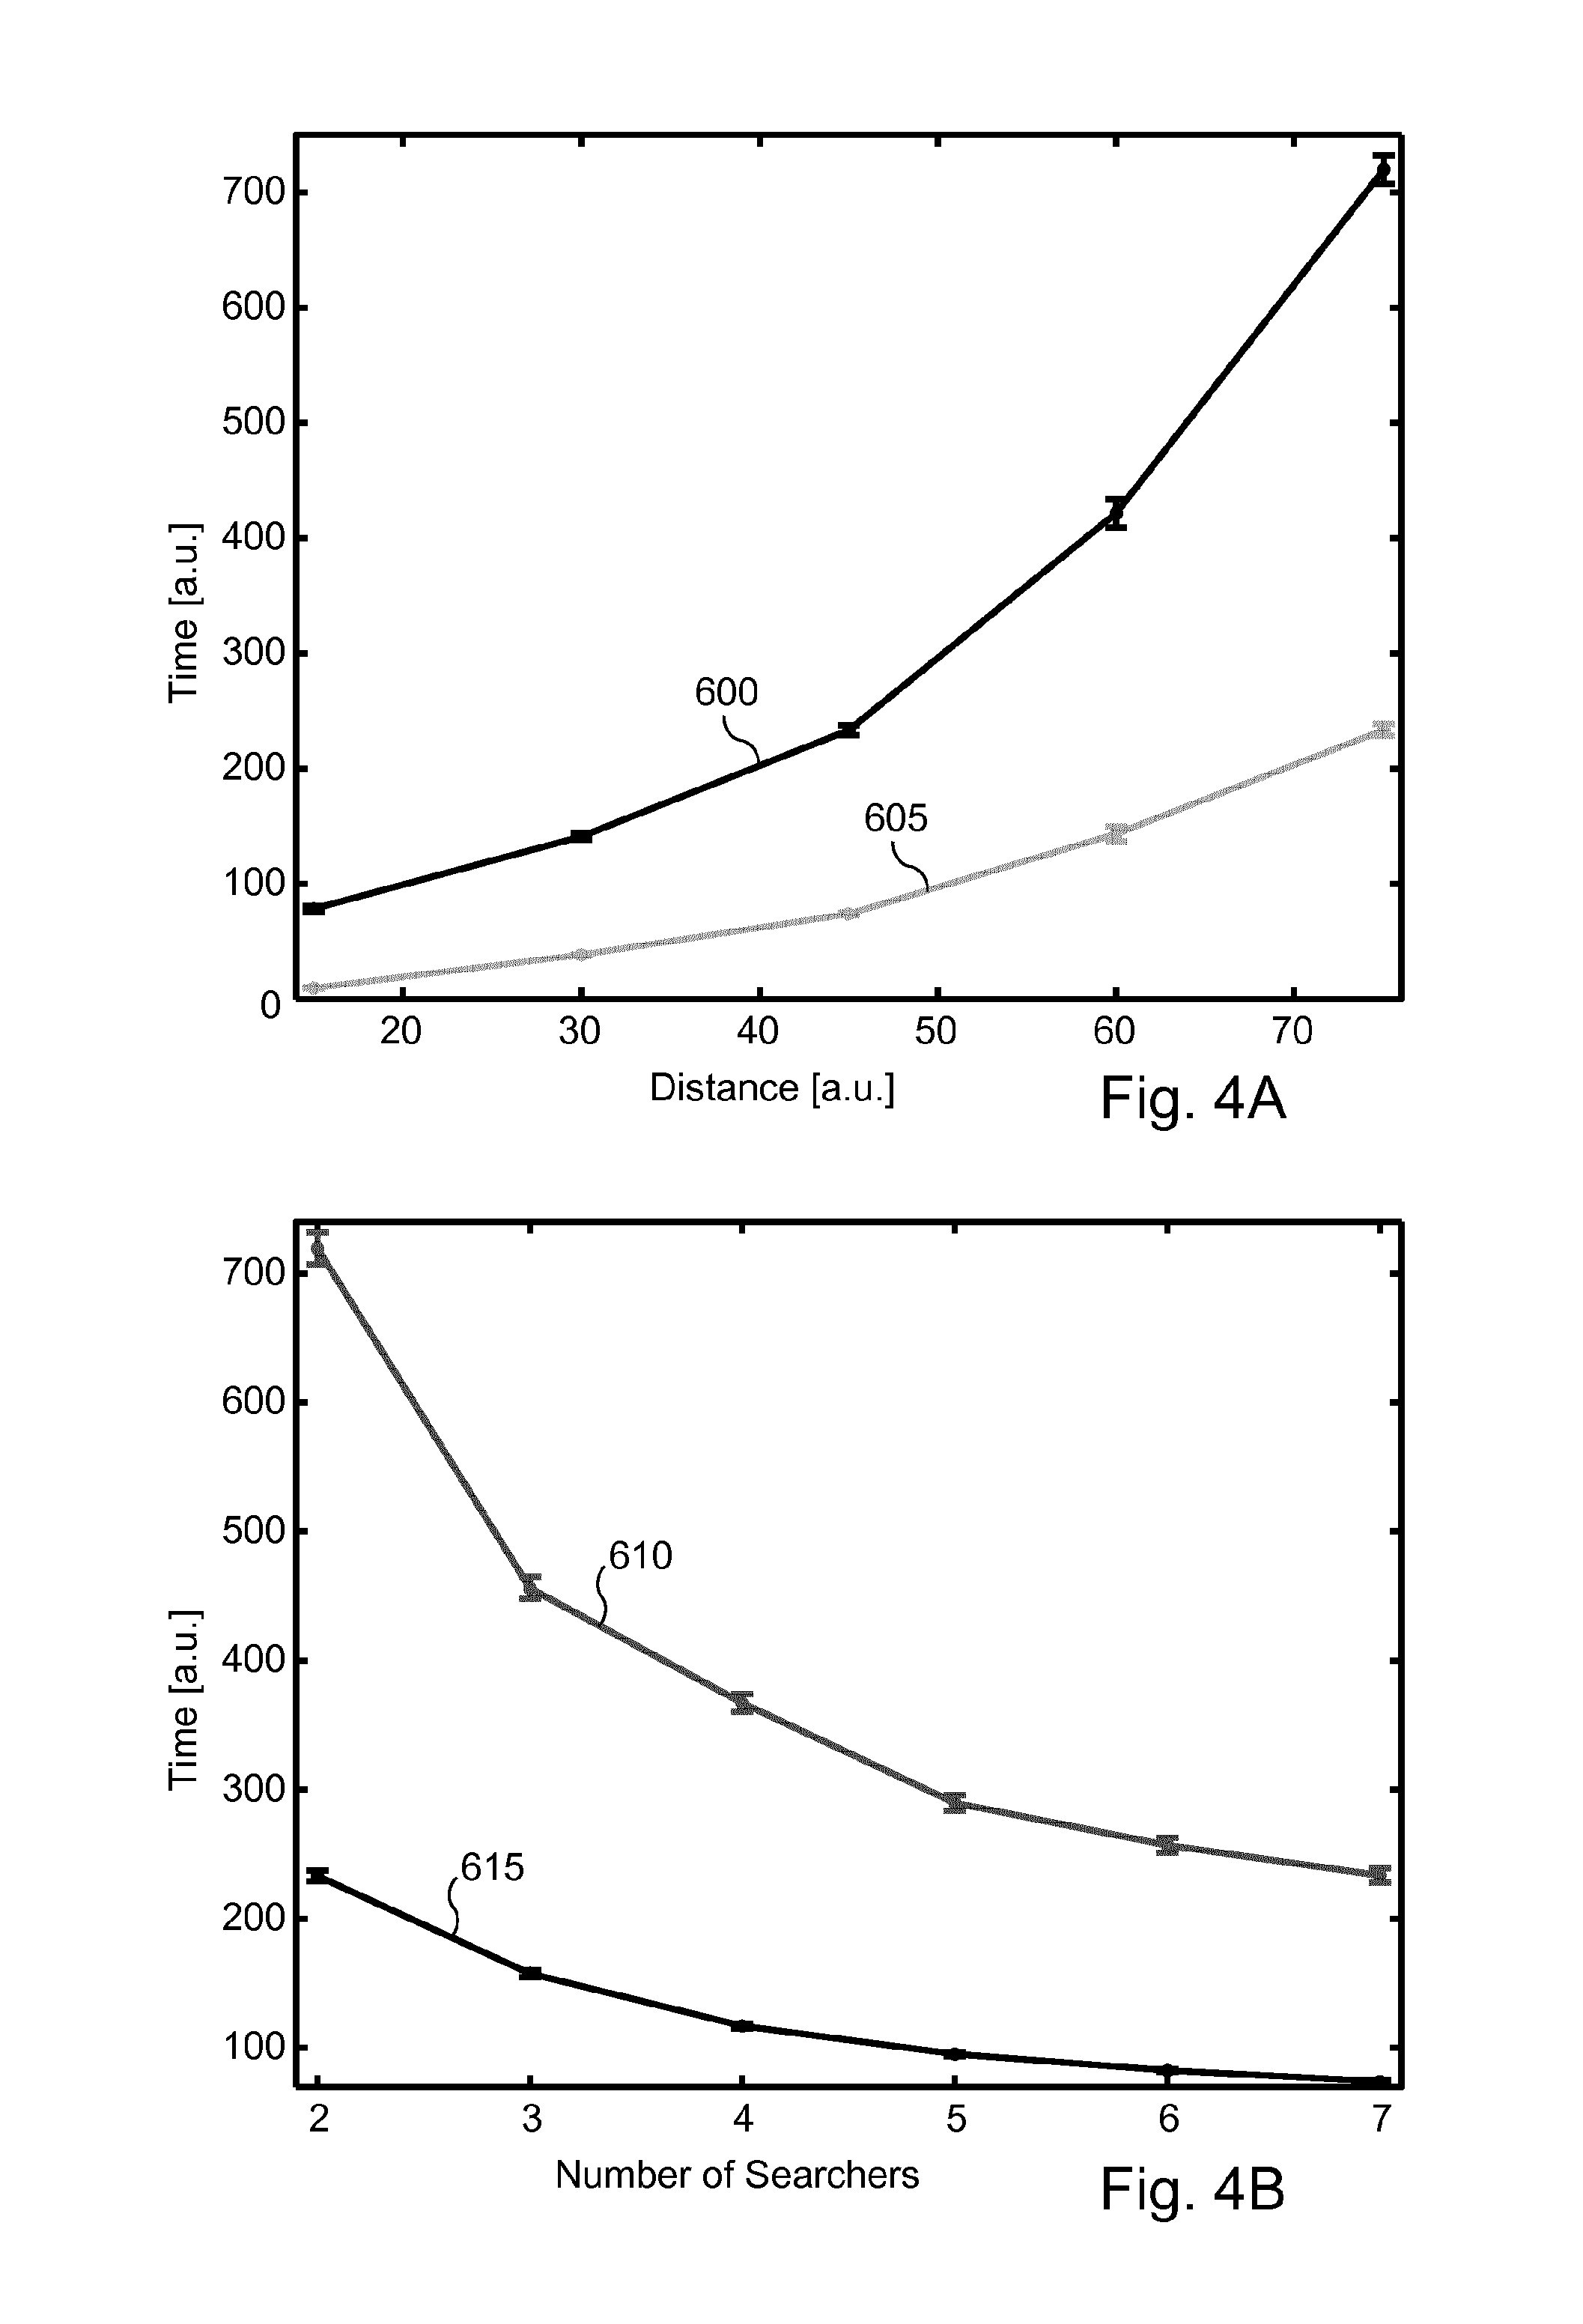 Method, device, and computer program for locating an emitting source of which measurements of emission propagation at locations different from that of the emitting source can be obtained from those locations, lacking space perception